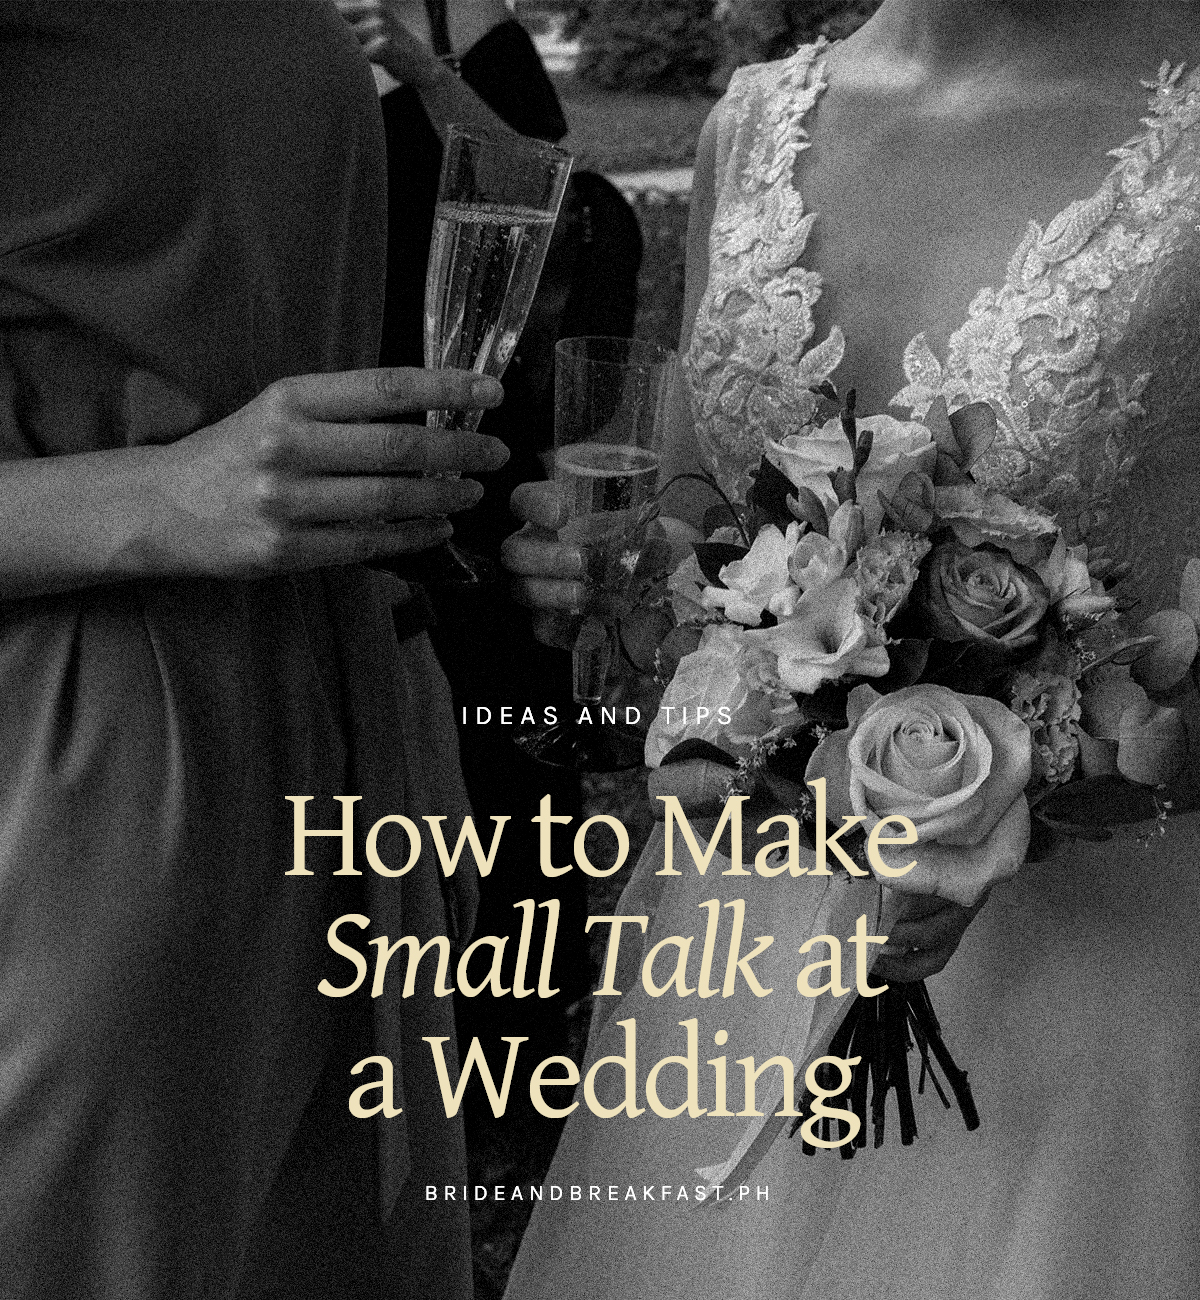 How to Make Small Talk at a Wedding